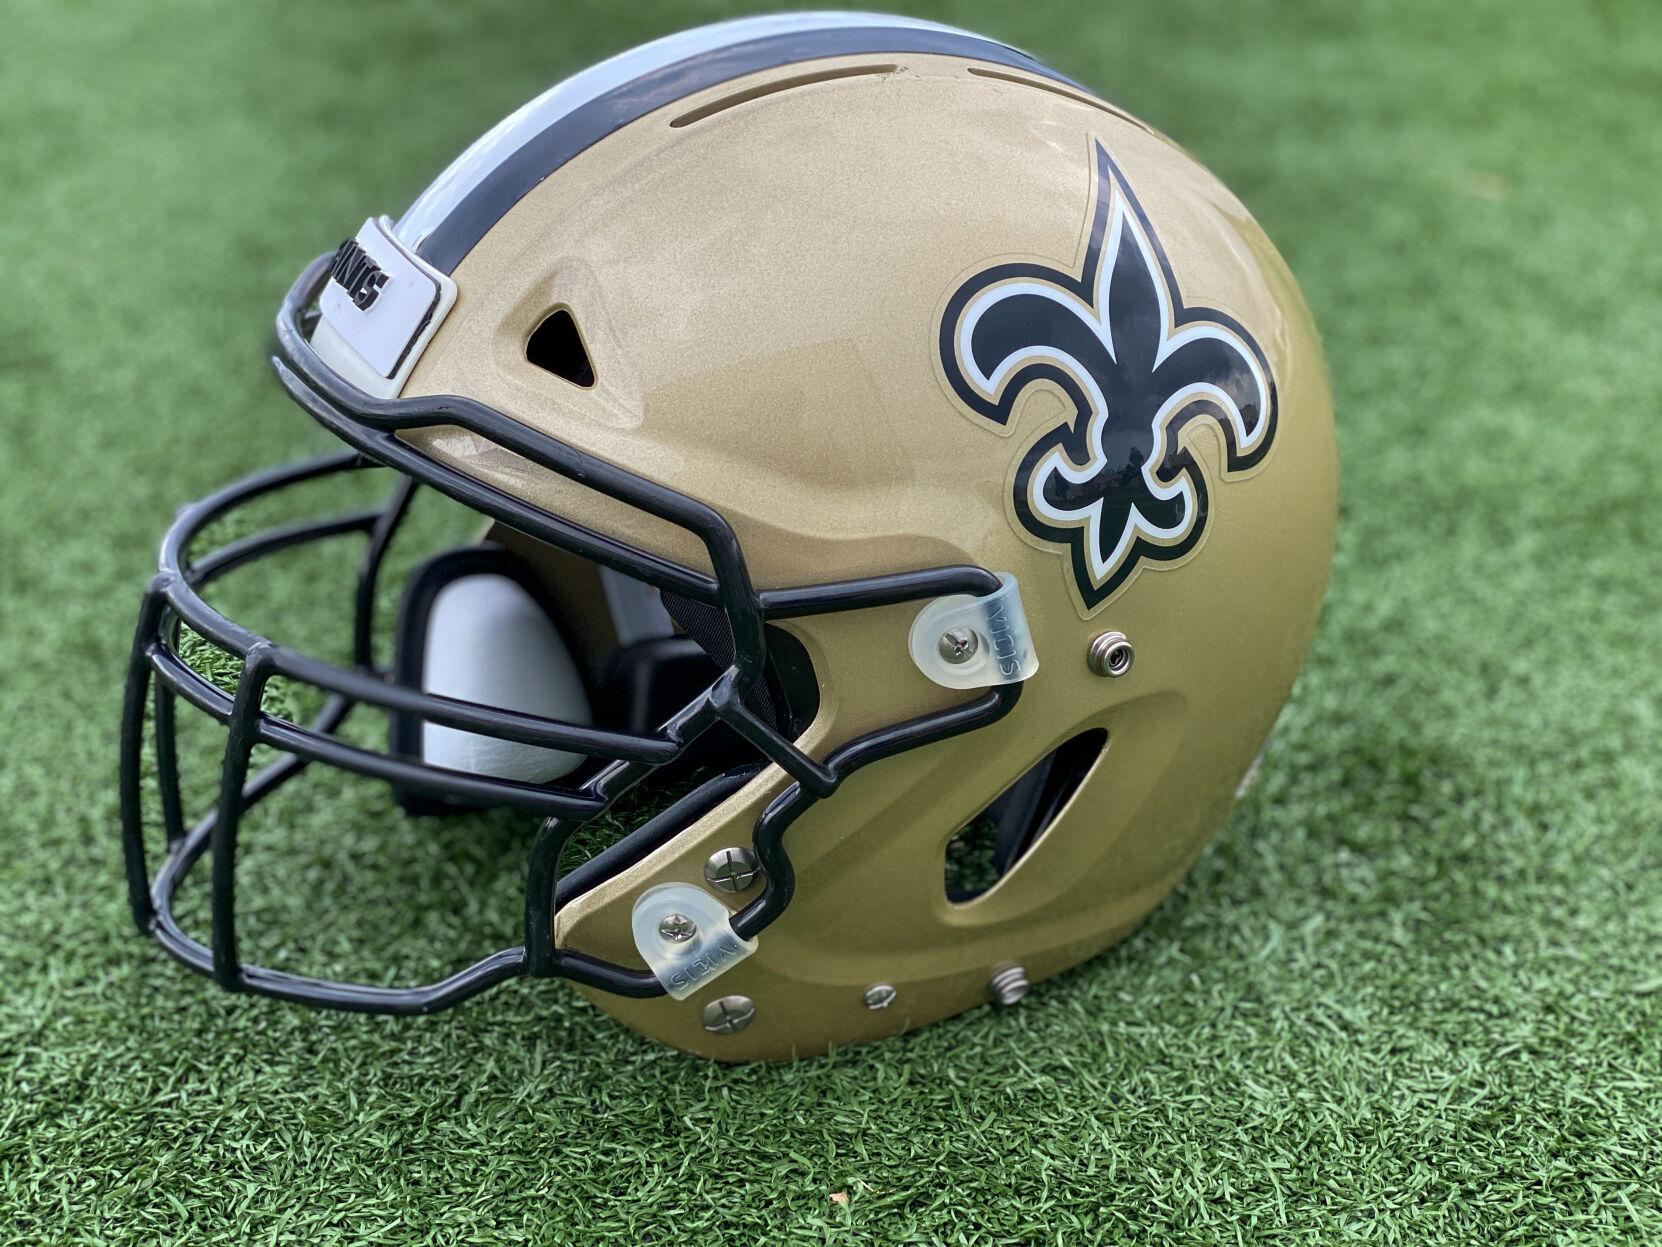 Saints sign 2 to practice squad, including a former starting OL